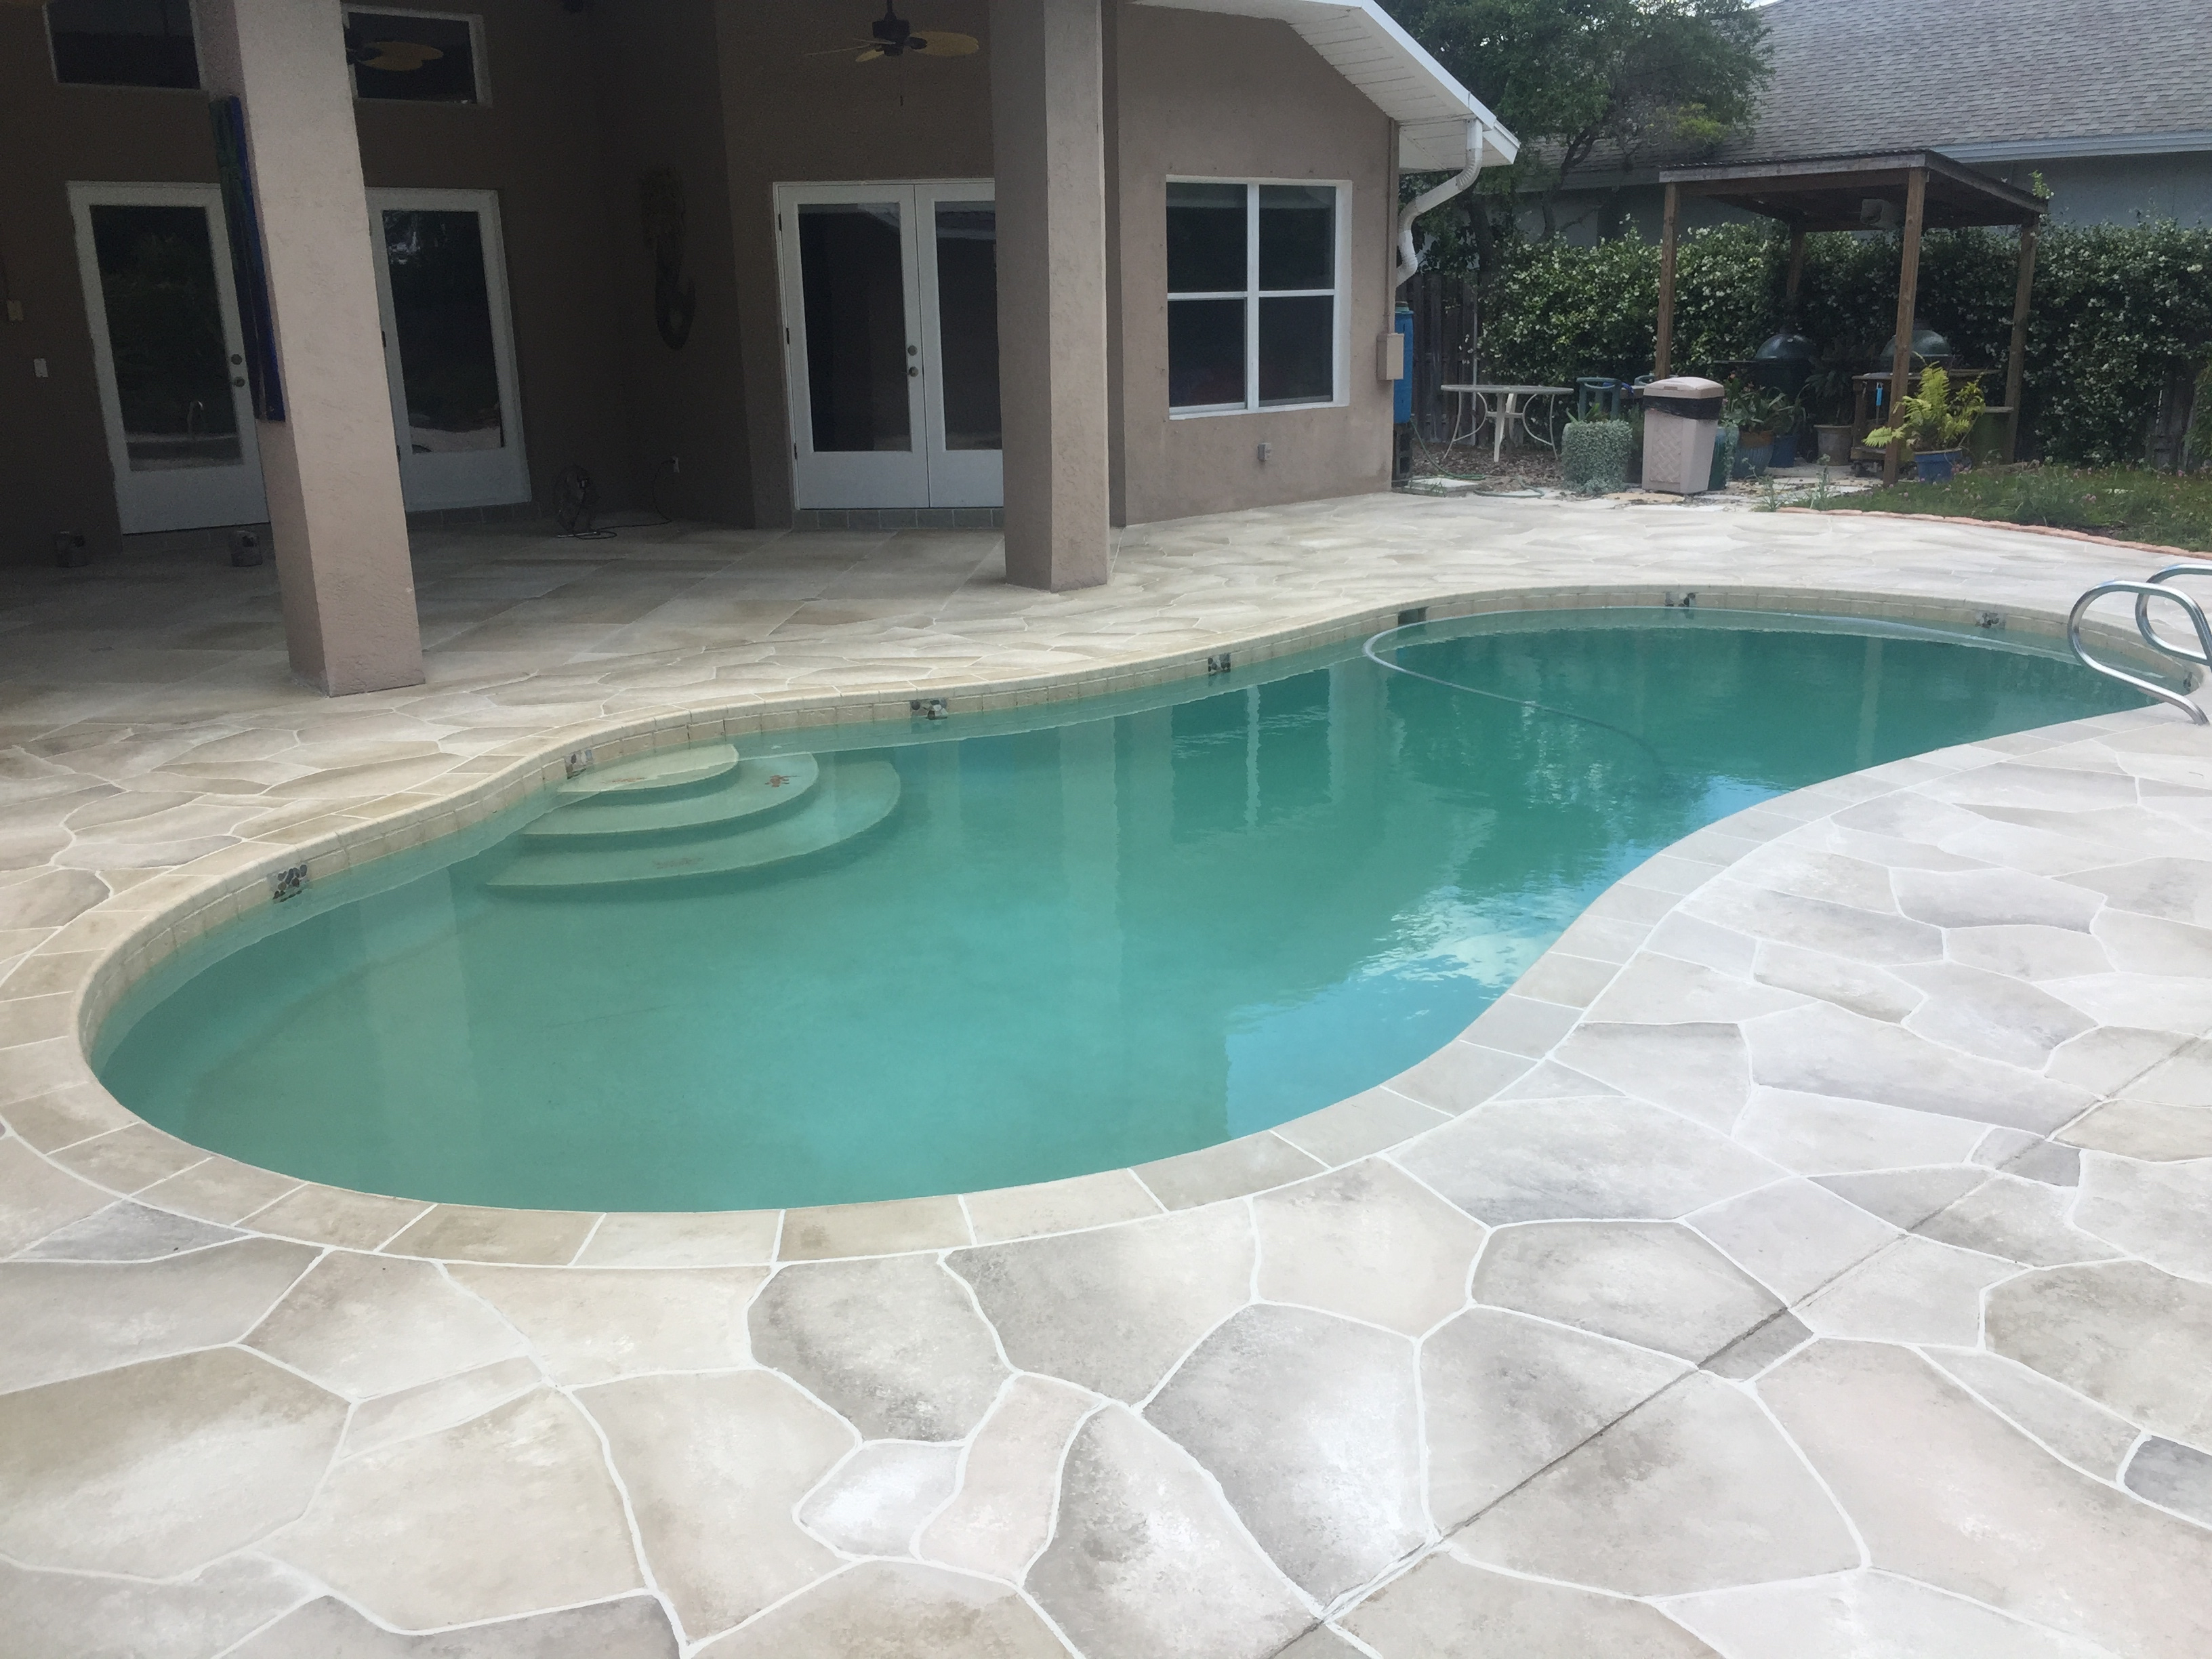 36 Travertine Pool Tile Travertine Coping And Tile With Pebble Tec pertaining to size 3264 X 2448